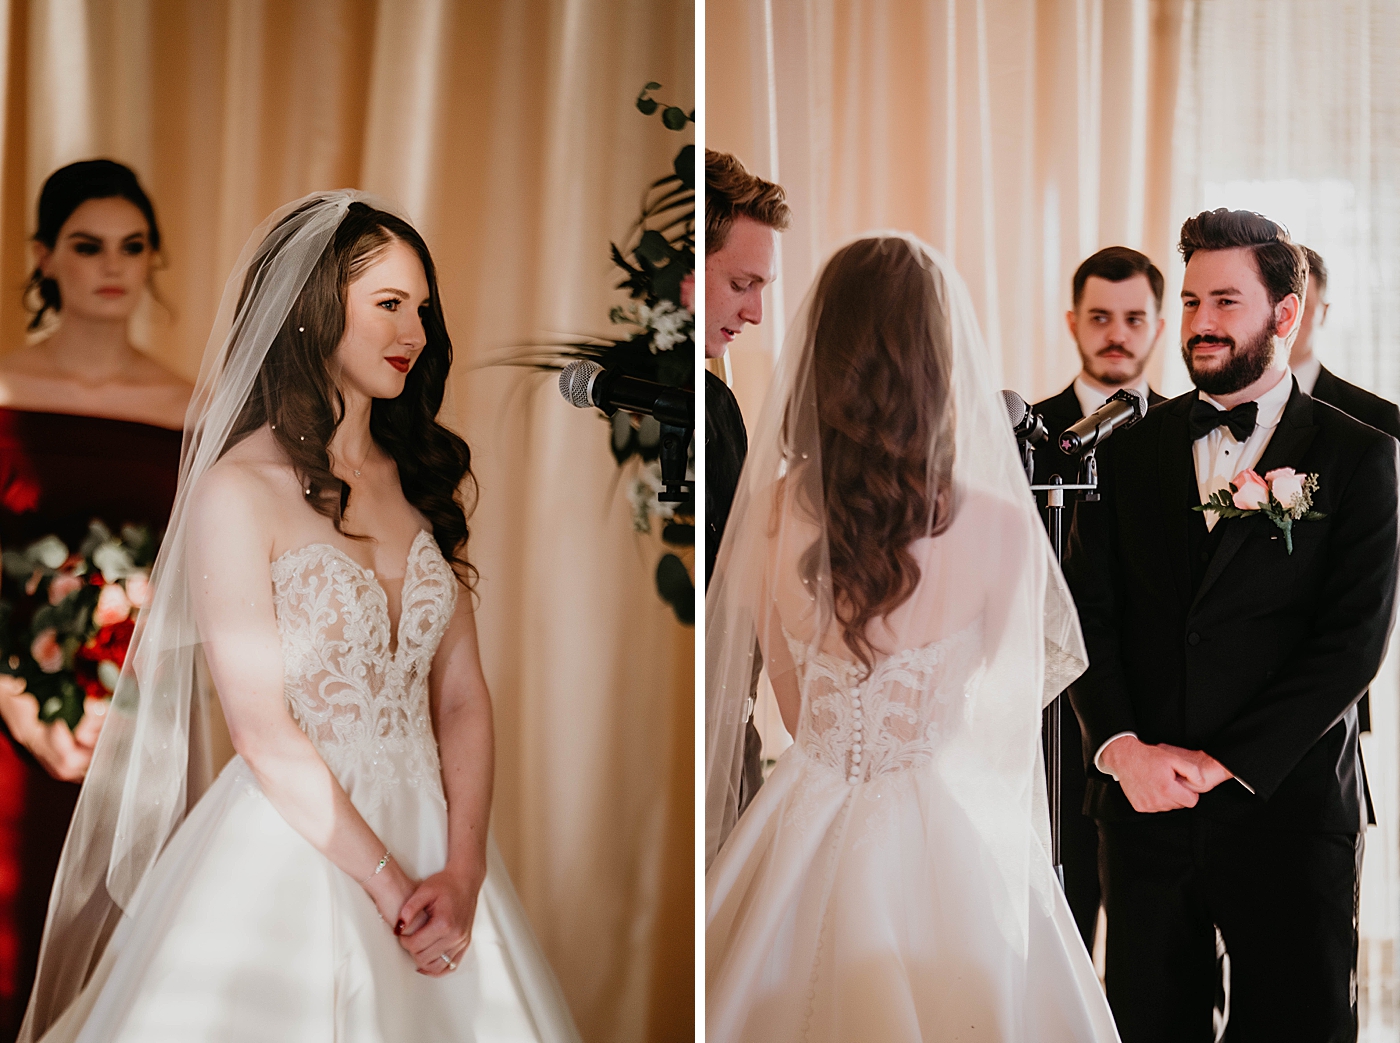 Portraits of Bride and Groom looking at each other during homily Ceremony Breakers West Wedding Photography captured by South Florida Wedding Photographer Krystal Capone Photography 